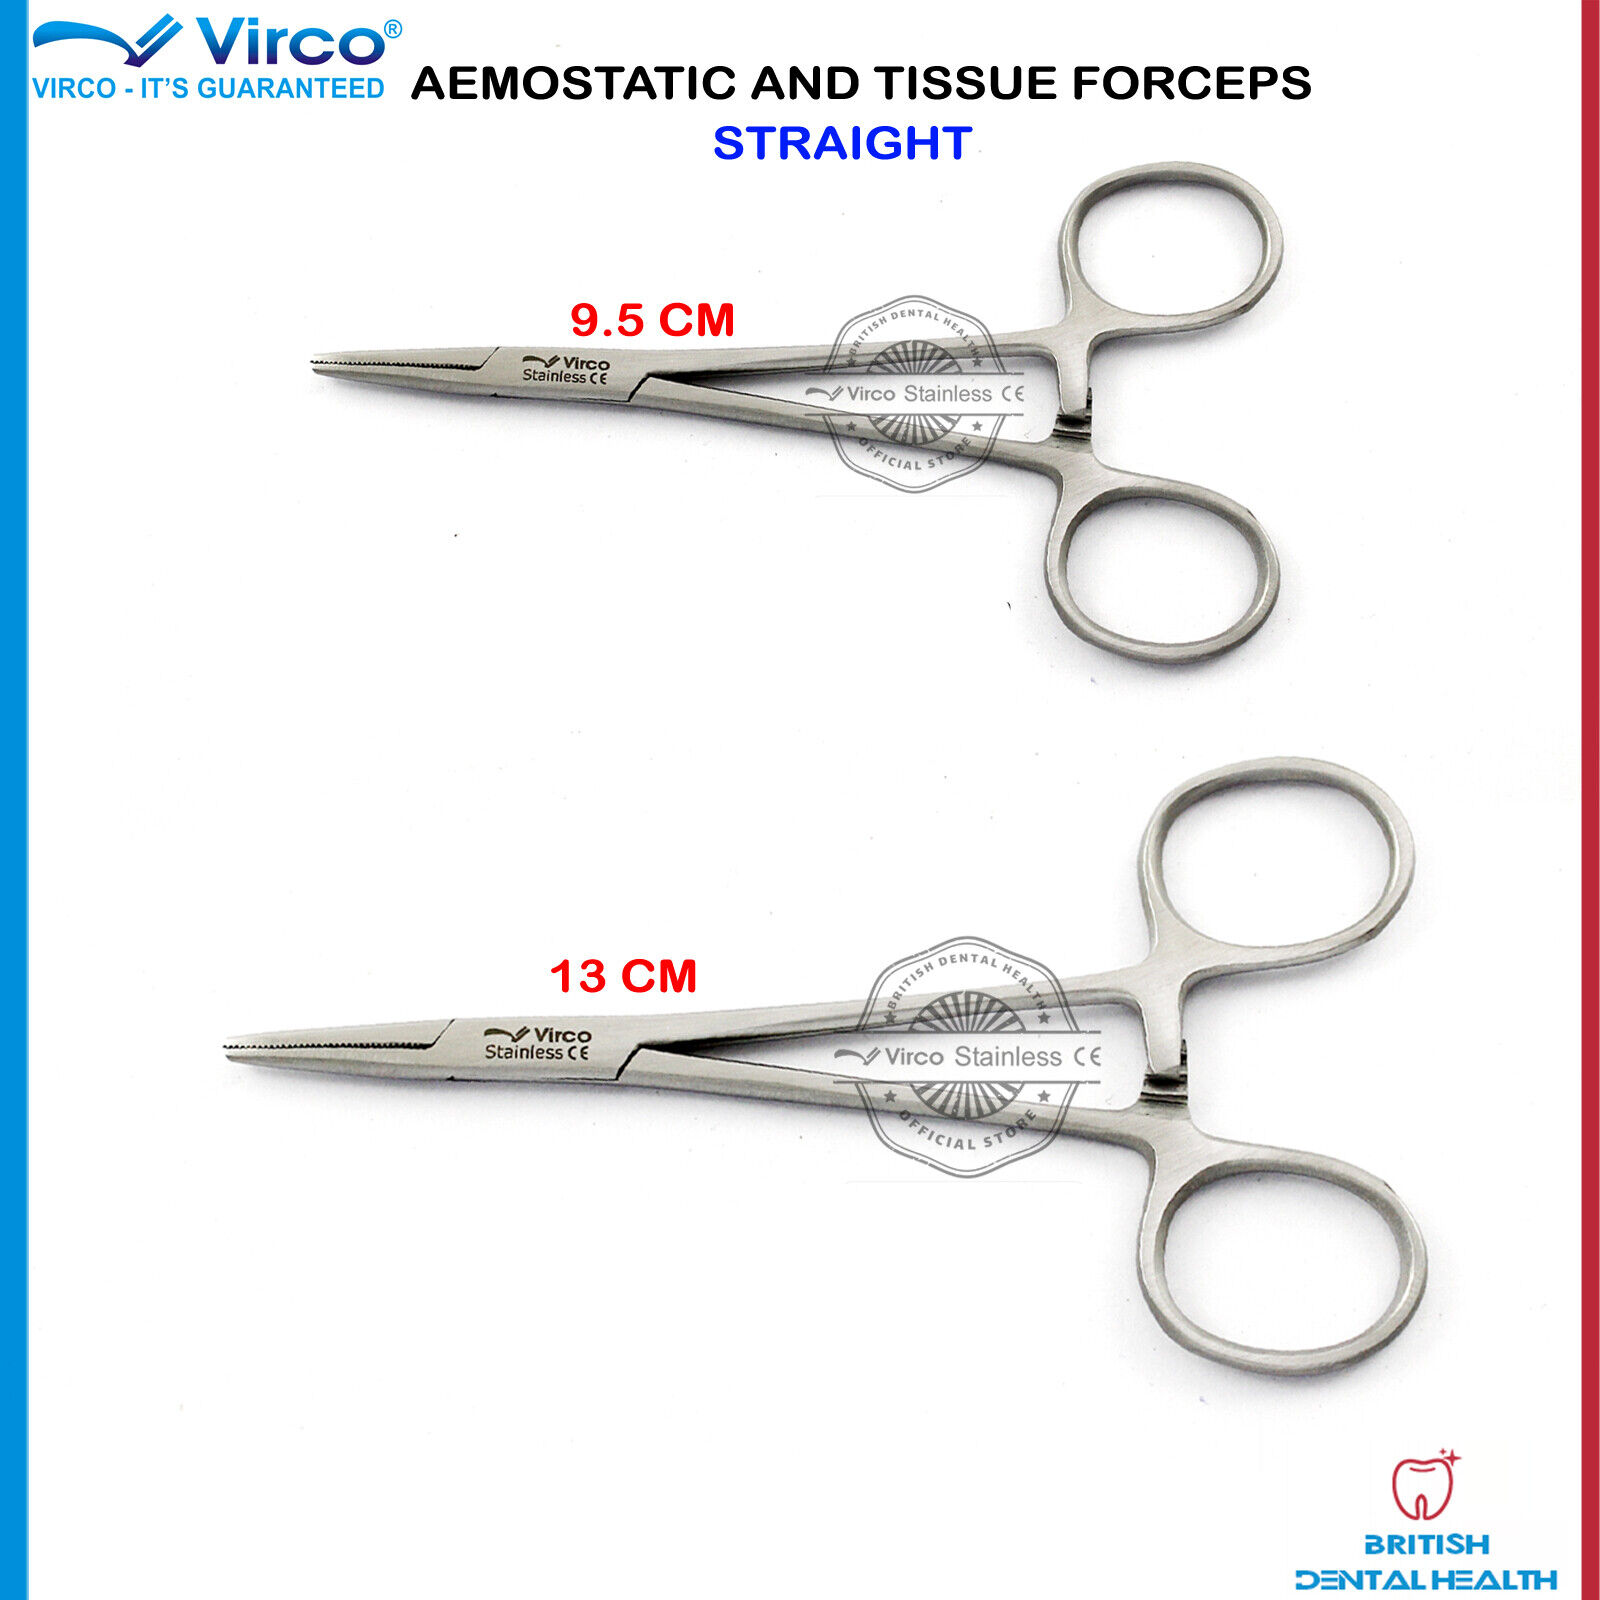 MOSQUITO HAEMOSTATIC STRAIGHT FORCEPS CLAMP SET SMALL 9.5CM LARGE 13CM SURGICAL